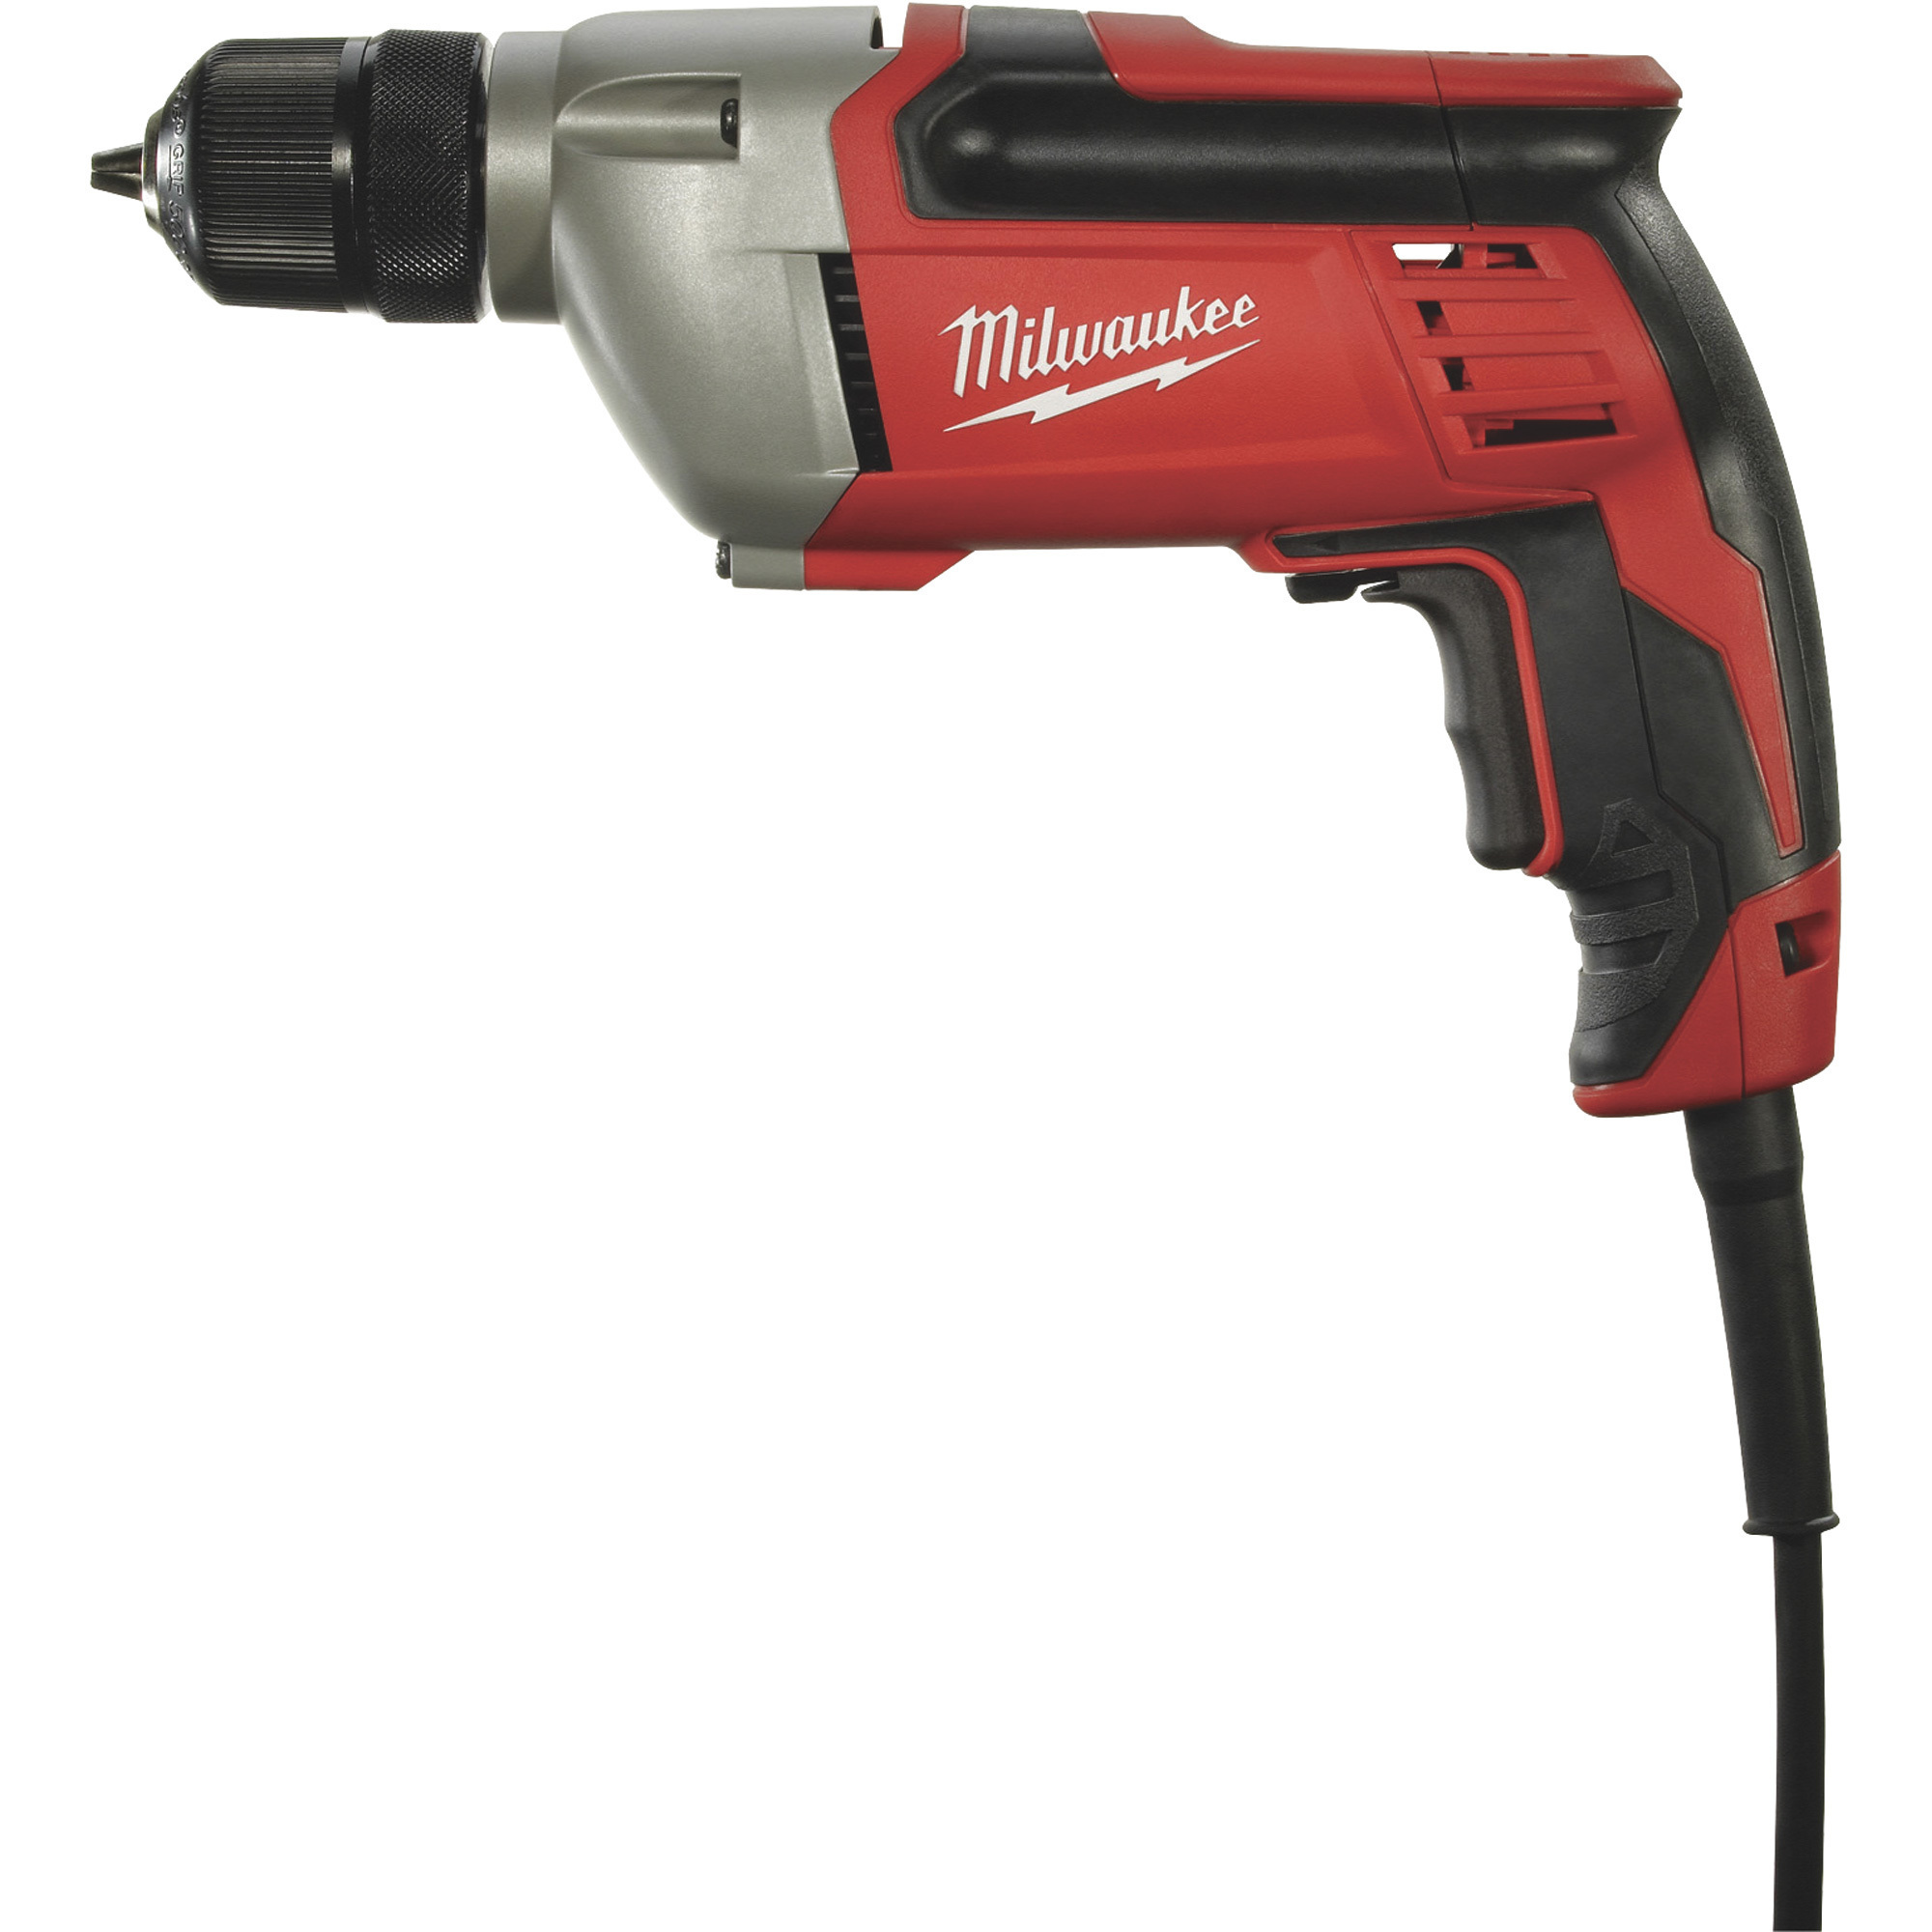 Milwaukee Corded Electric Drill, 3/8Inch Keyless Chuck, 8.0 Amp, 2800 RPM, Model 0240-20